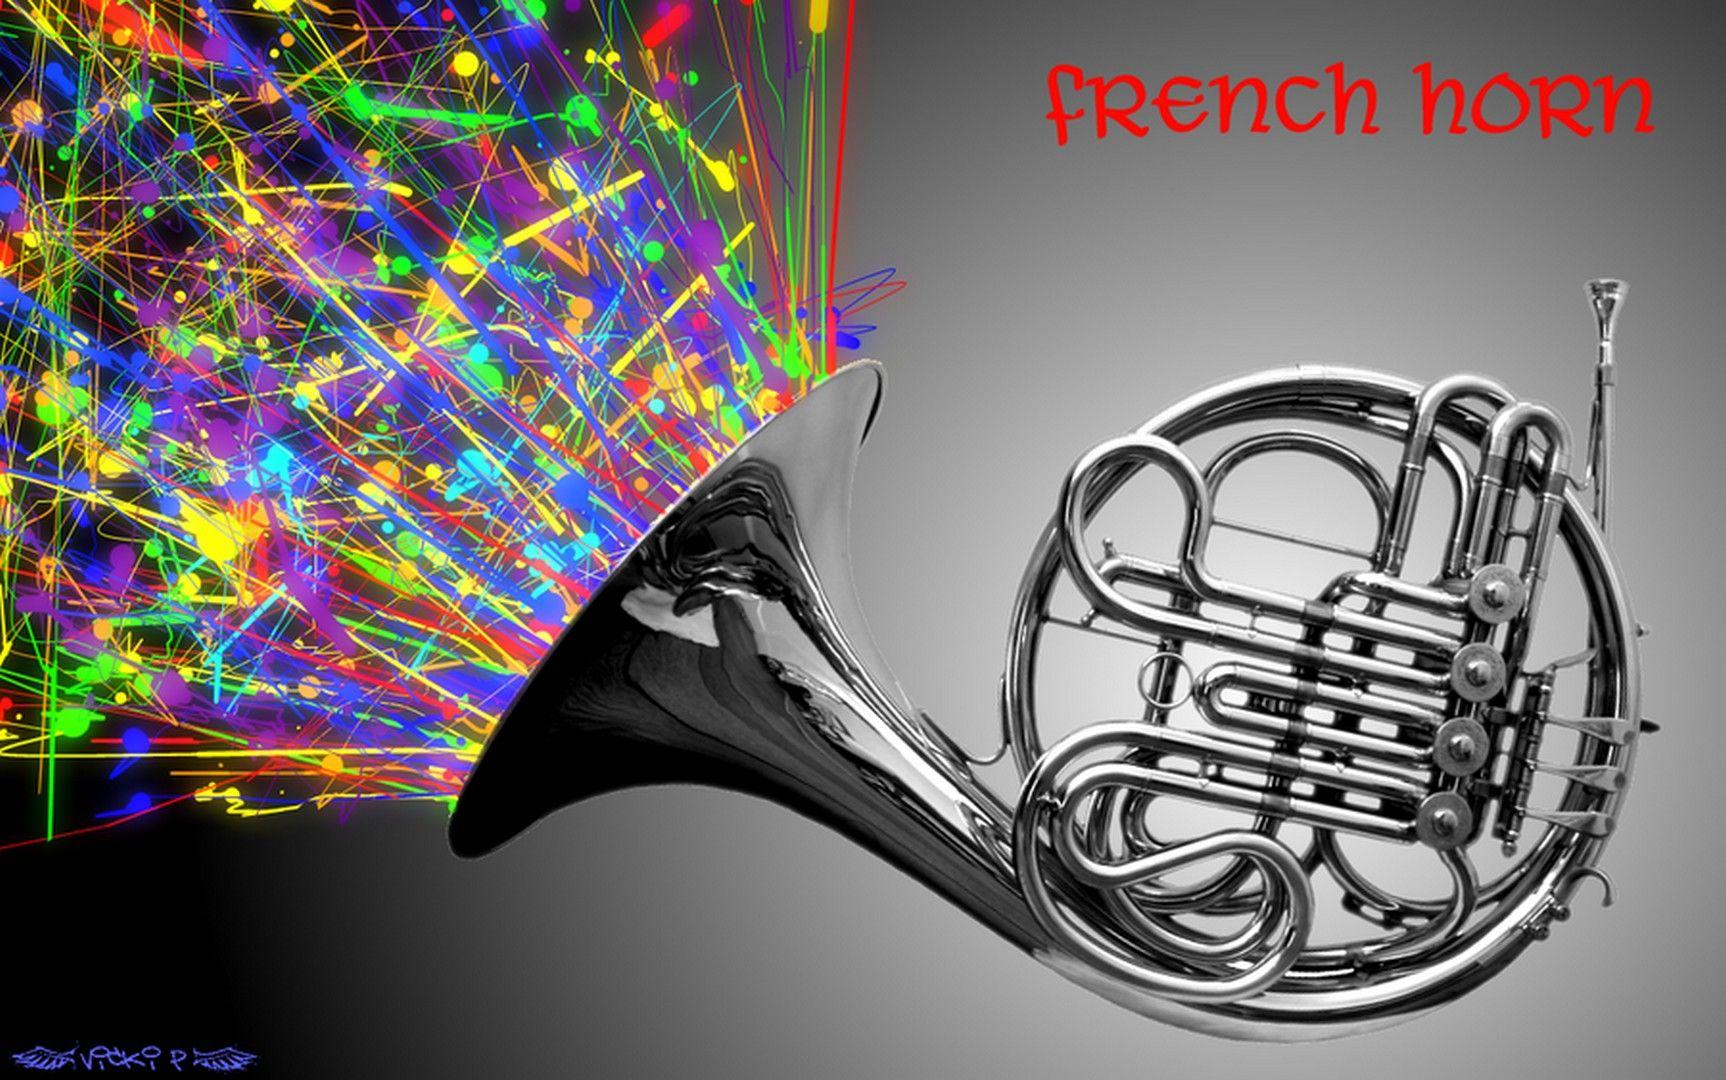 HD French horn wallpaper. French horn wallpaper HD. French horn